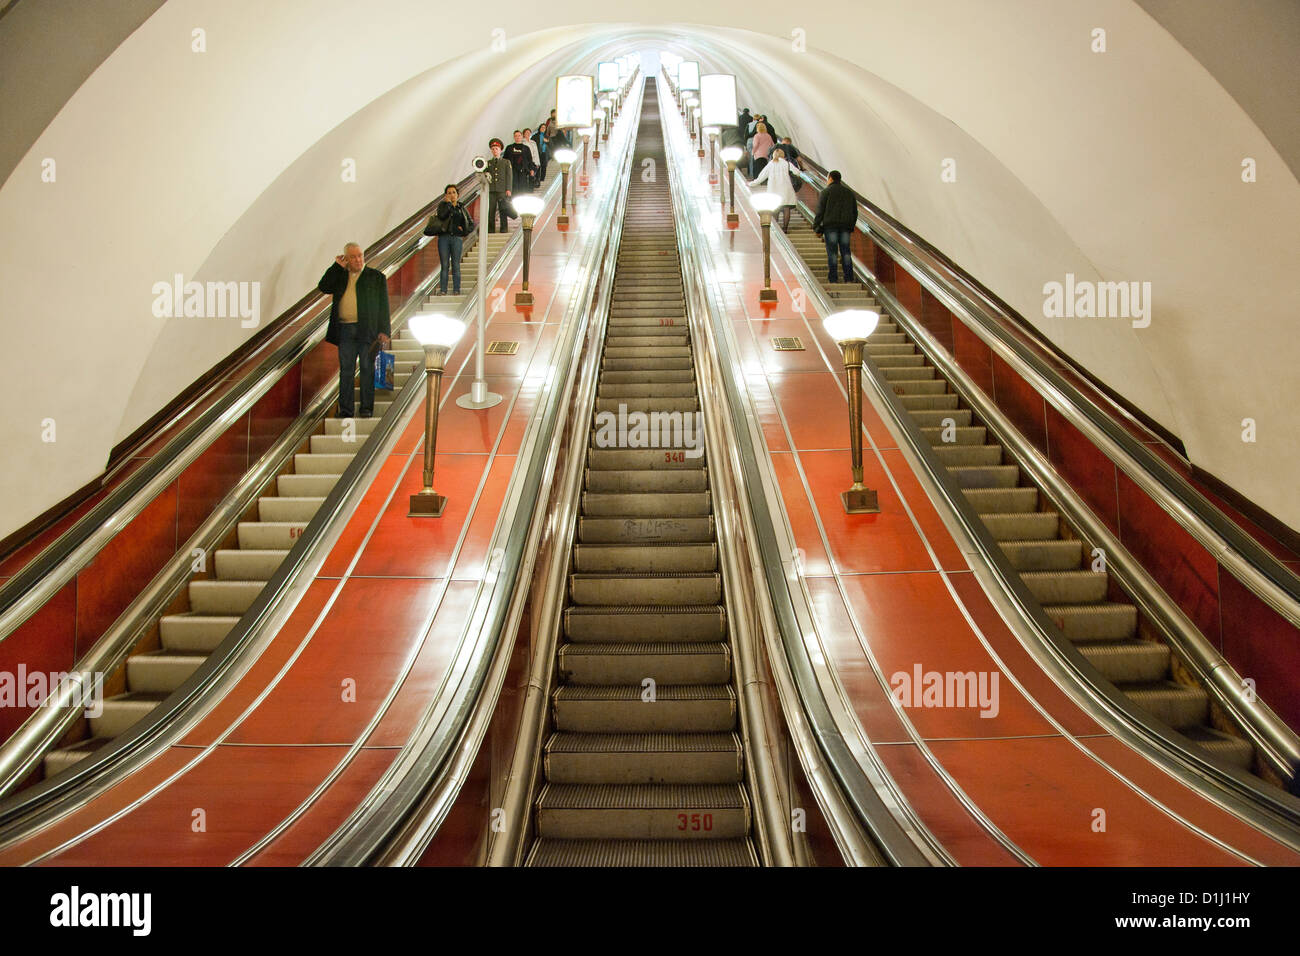 Escalators of the St Petersburg metro system in Saint Petersburg, Russia. It is one of the deepest metro systems in the world. Stock Photo